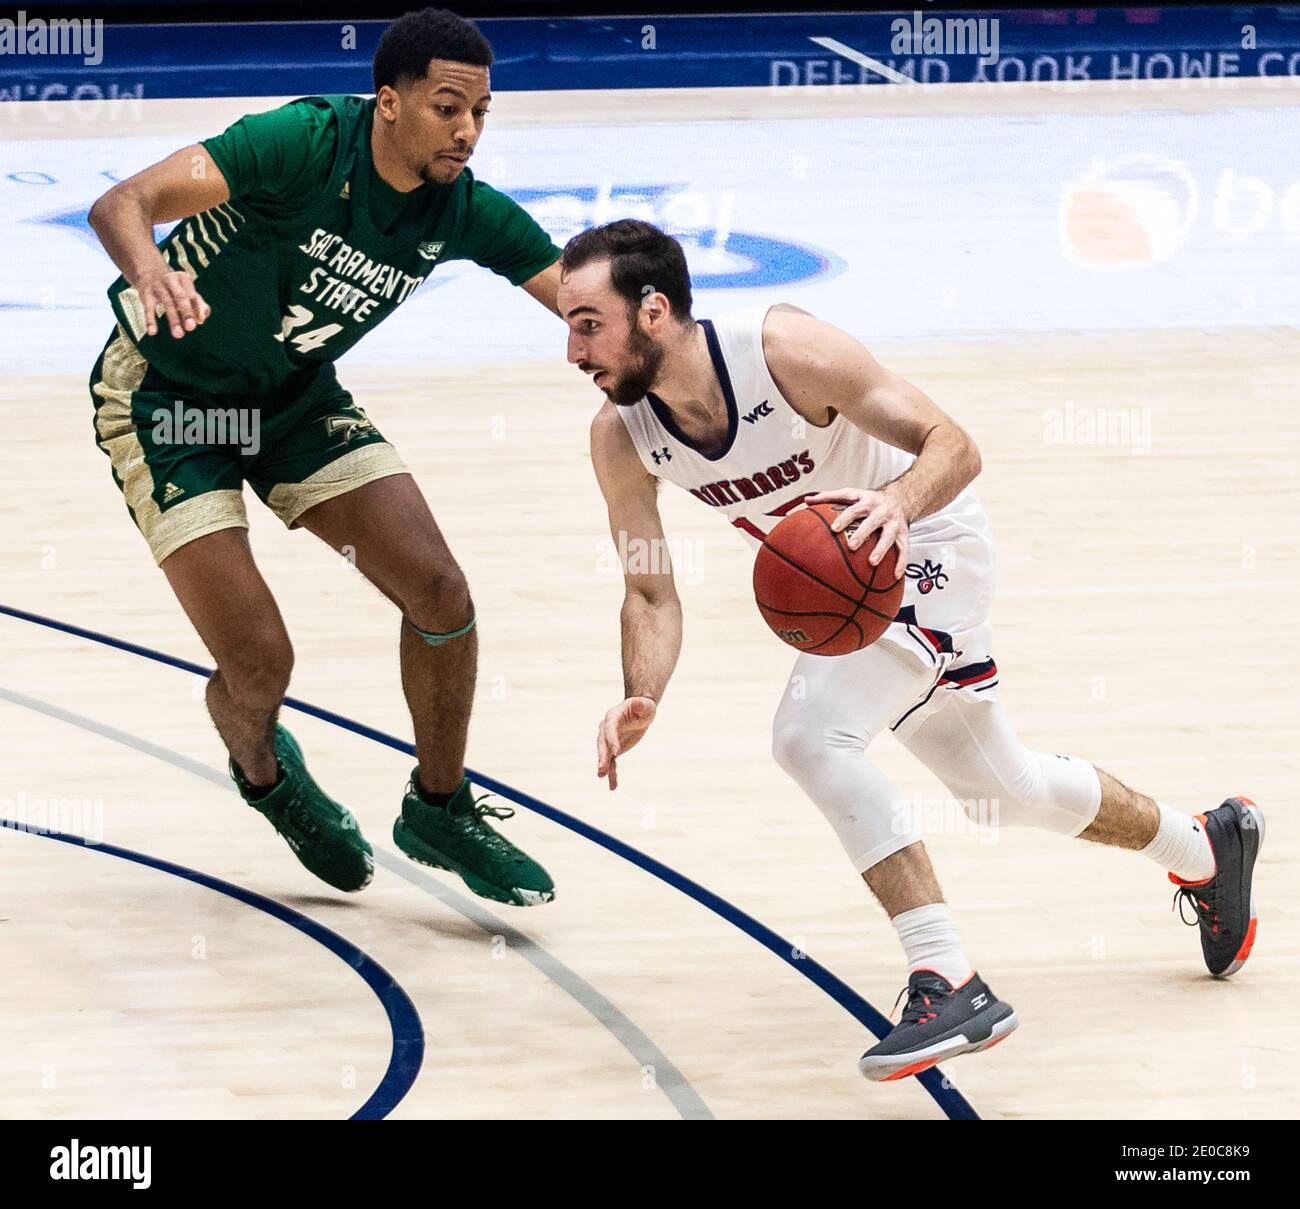 Moraga, CA U.S. 30th Dec, 2020. A. St. Mary's Gaels guard Tommy Kuhse (12) drives to the basket during the NCAA Men's Basketball game between Sacramento State Hornets and the Saint Mary's Gaels 63-45 win at McKeon Pavilion Moraga Calif. Thurman James/CSM/Alamy Live News Stock Photo